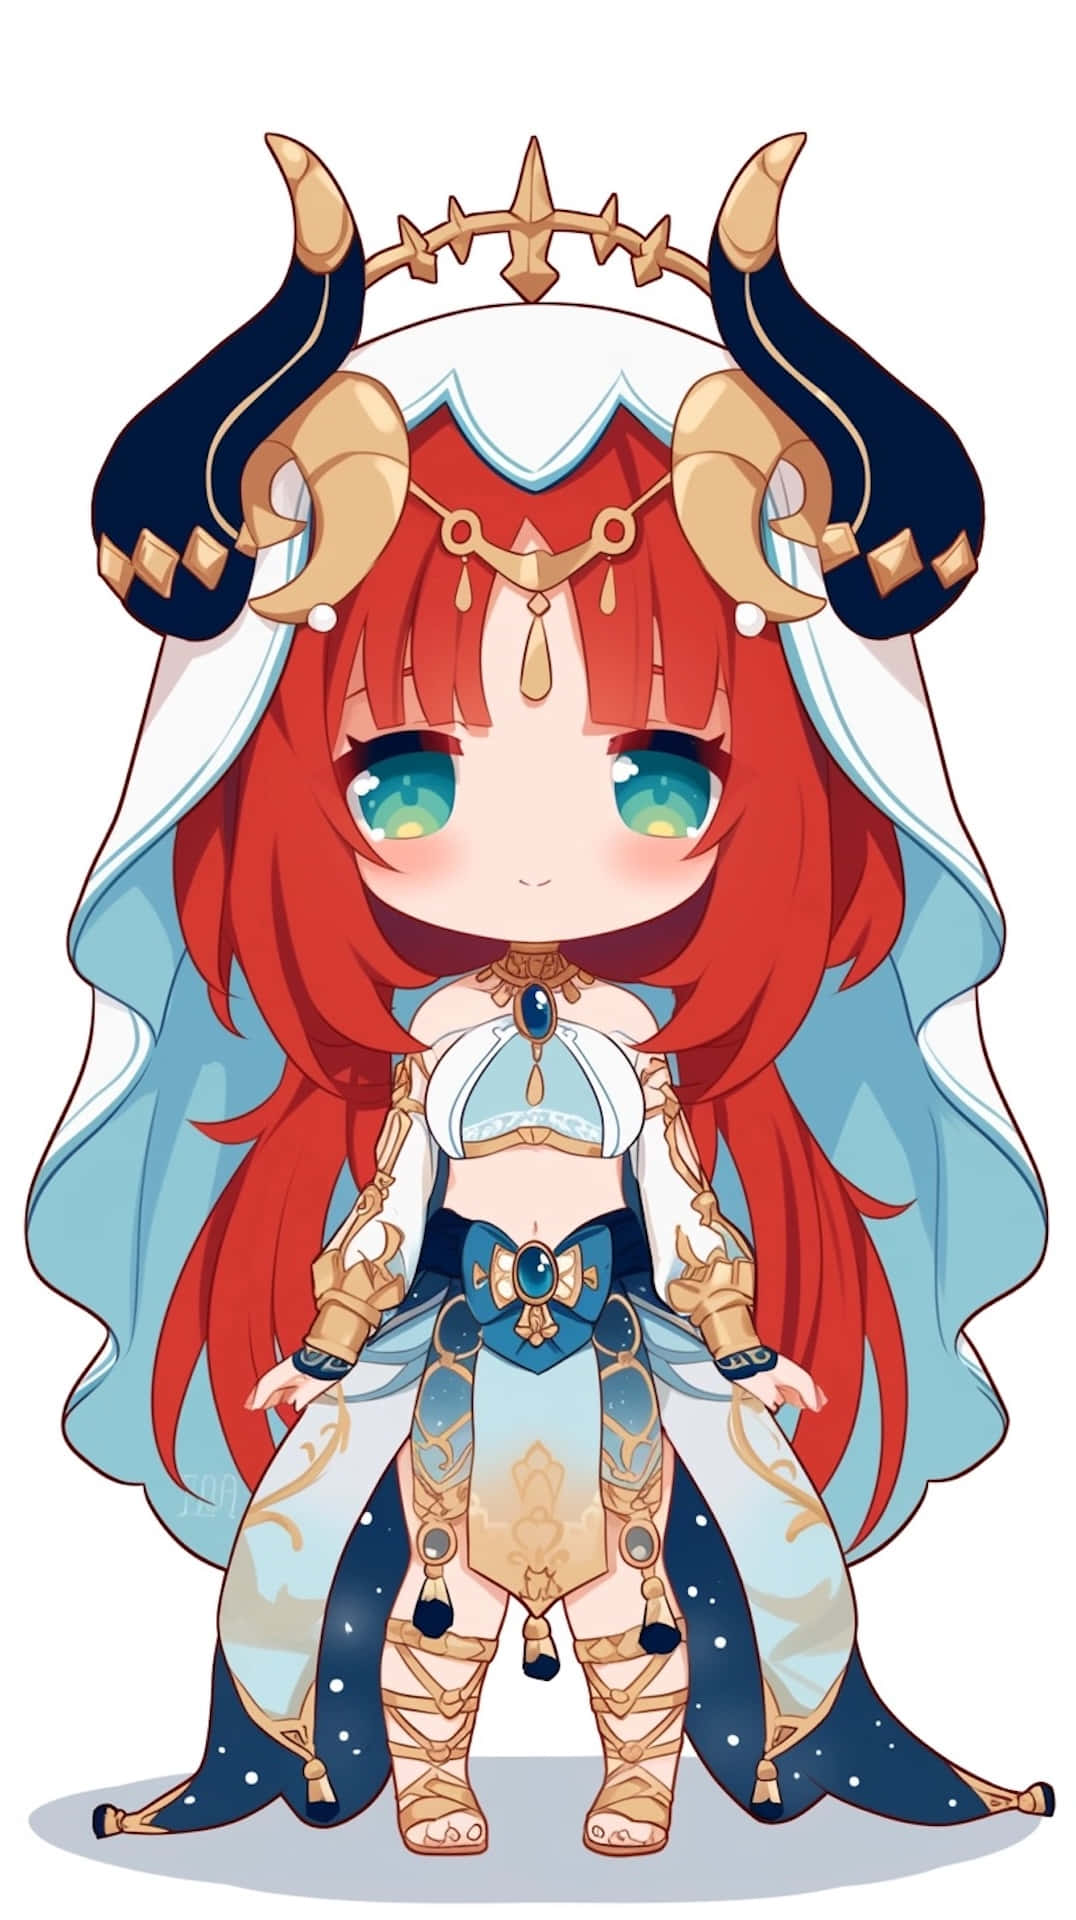 Chibi Style Red Haired Anime Character Wallpaper